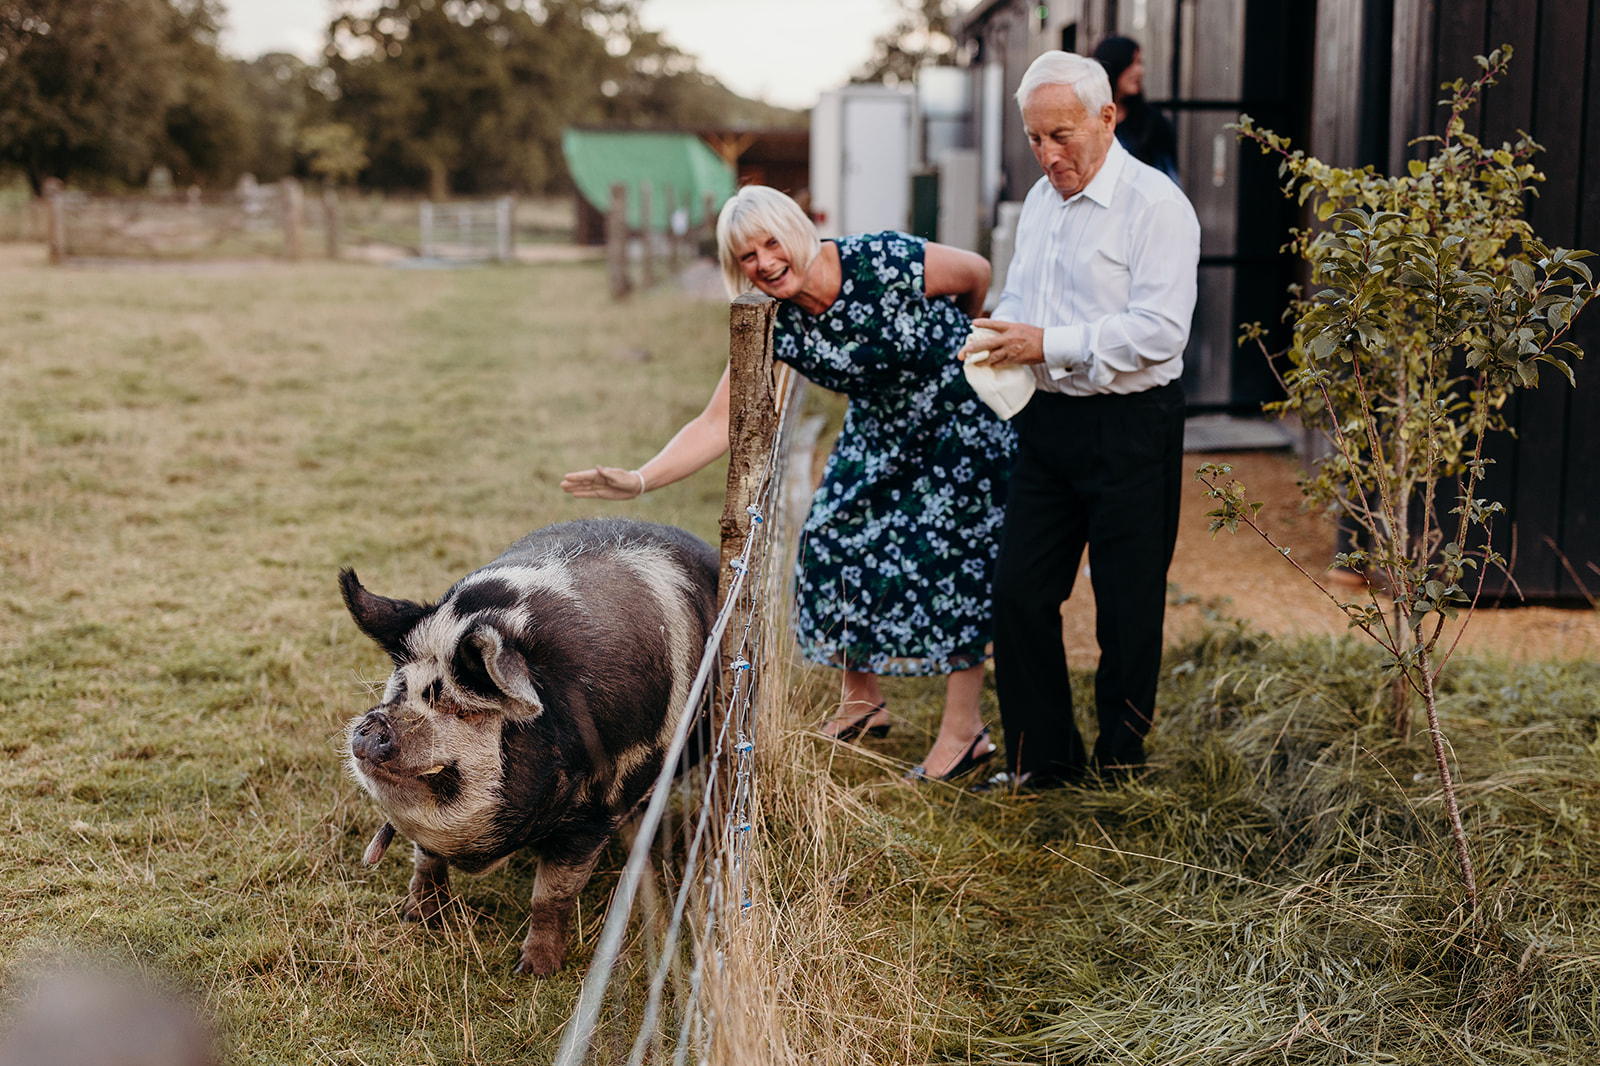 Mother of the groom sharing a special moment with an affectionate pig during a visit to the farm animals at the wedding 